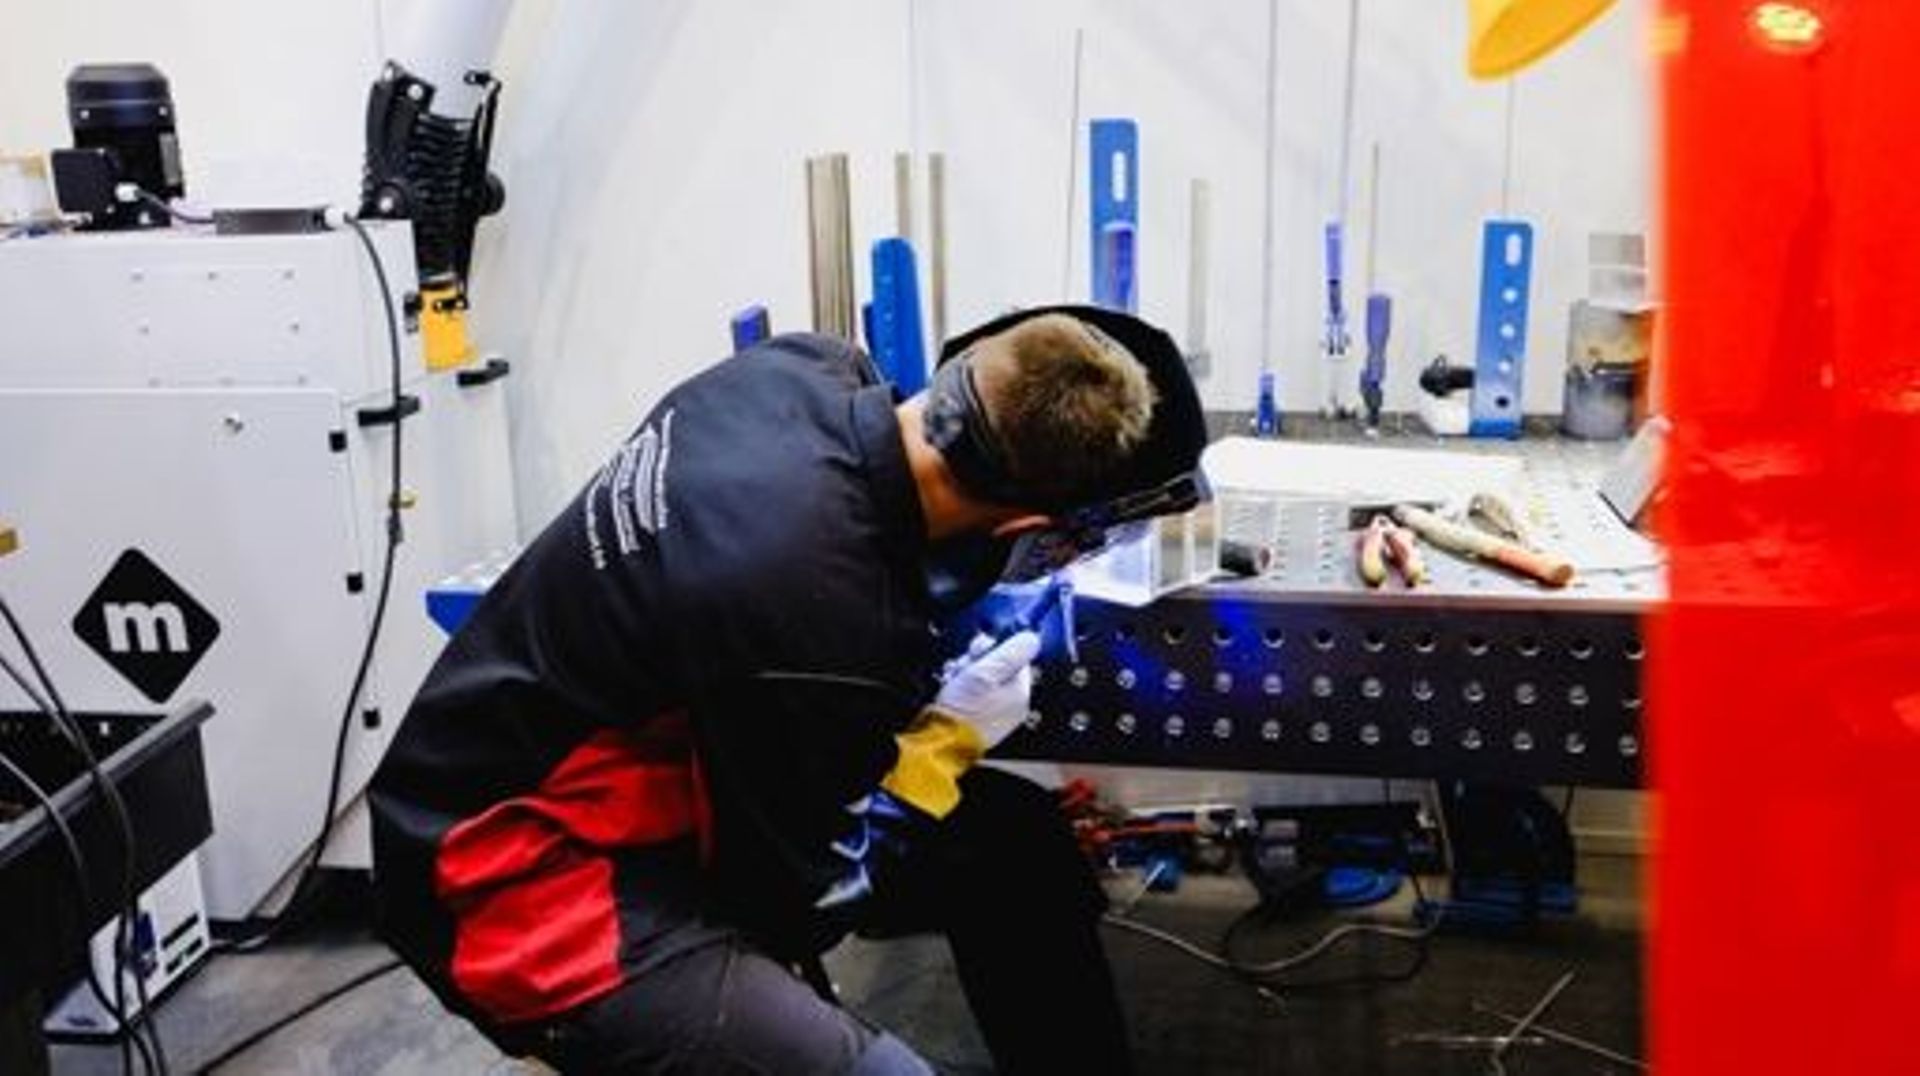 Belgian participant Maarten De Boey, welding, pictured during the Euroskills 2023 competition in Gdansk, Poland, Wednesday 06 September 2023. EuroSkills is a vocational skills competition which is staged as a European championship every two years. Around